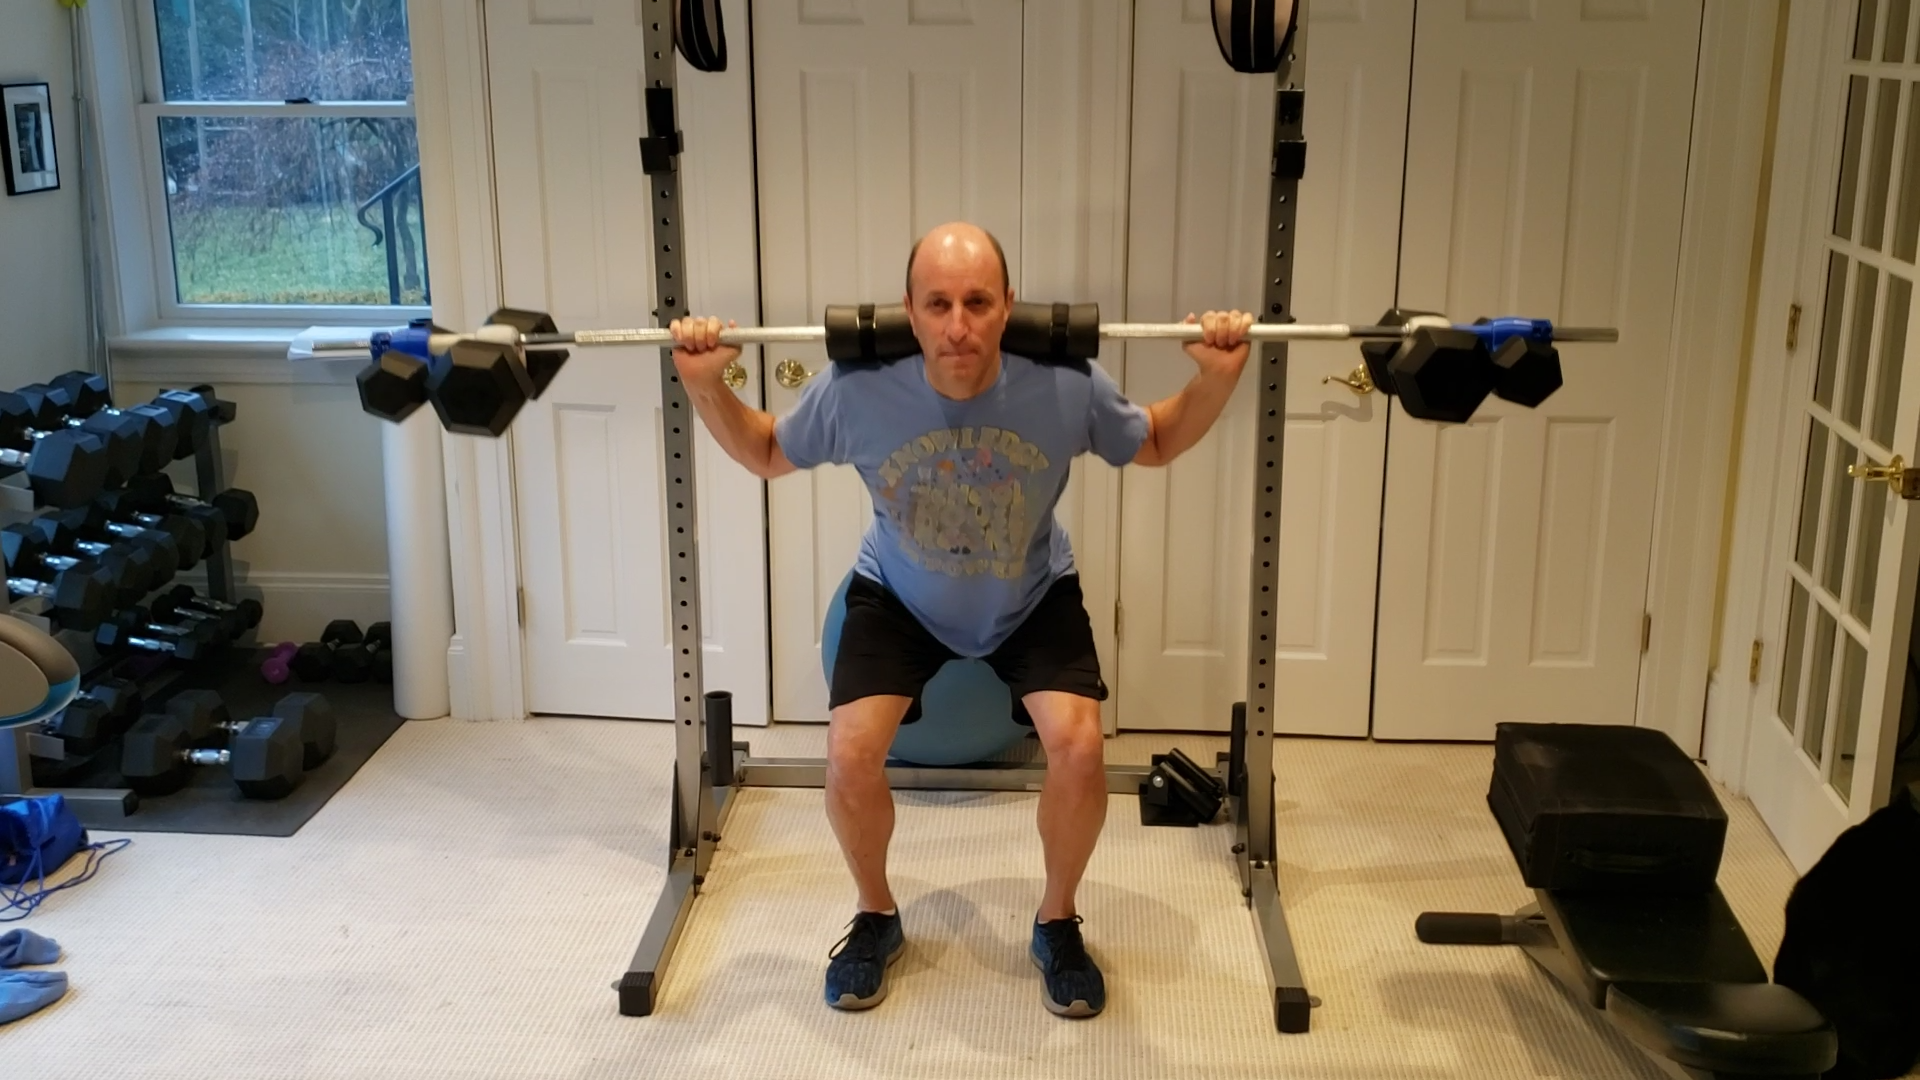 male in home gym doing barbell squats using dumbbells as weight plates connected to bar by Dualbell